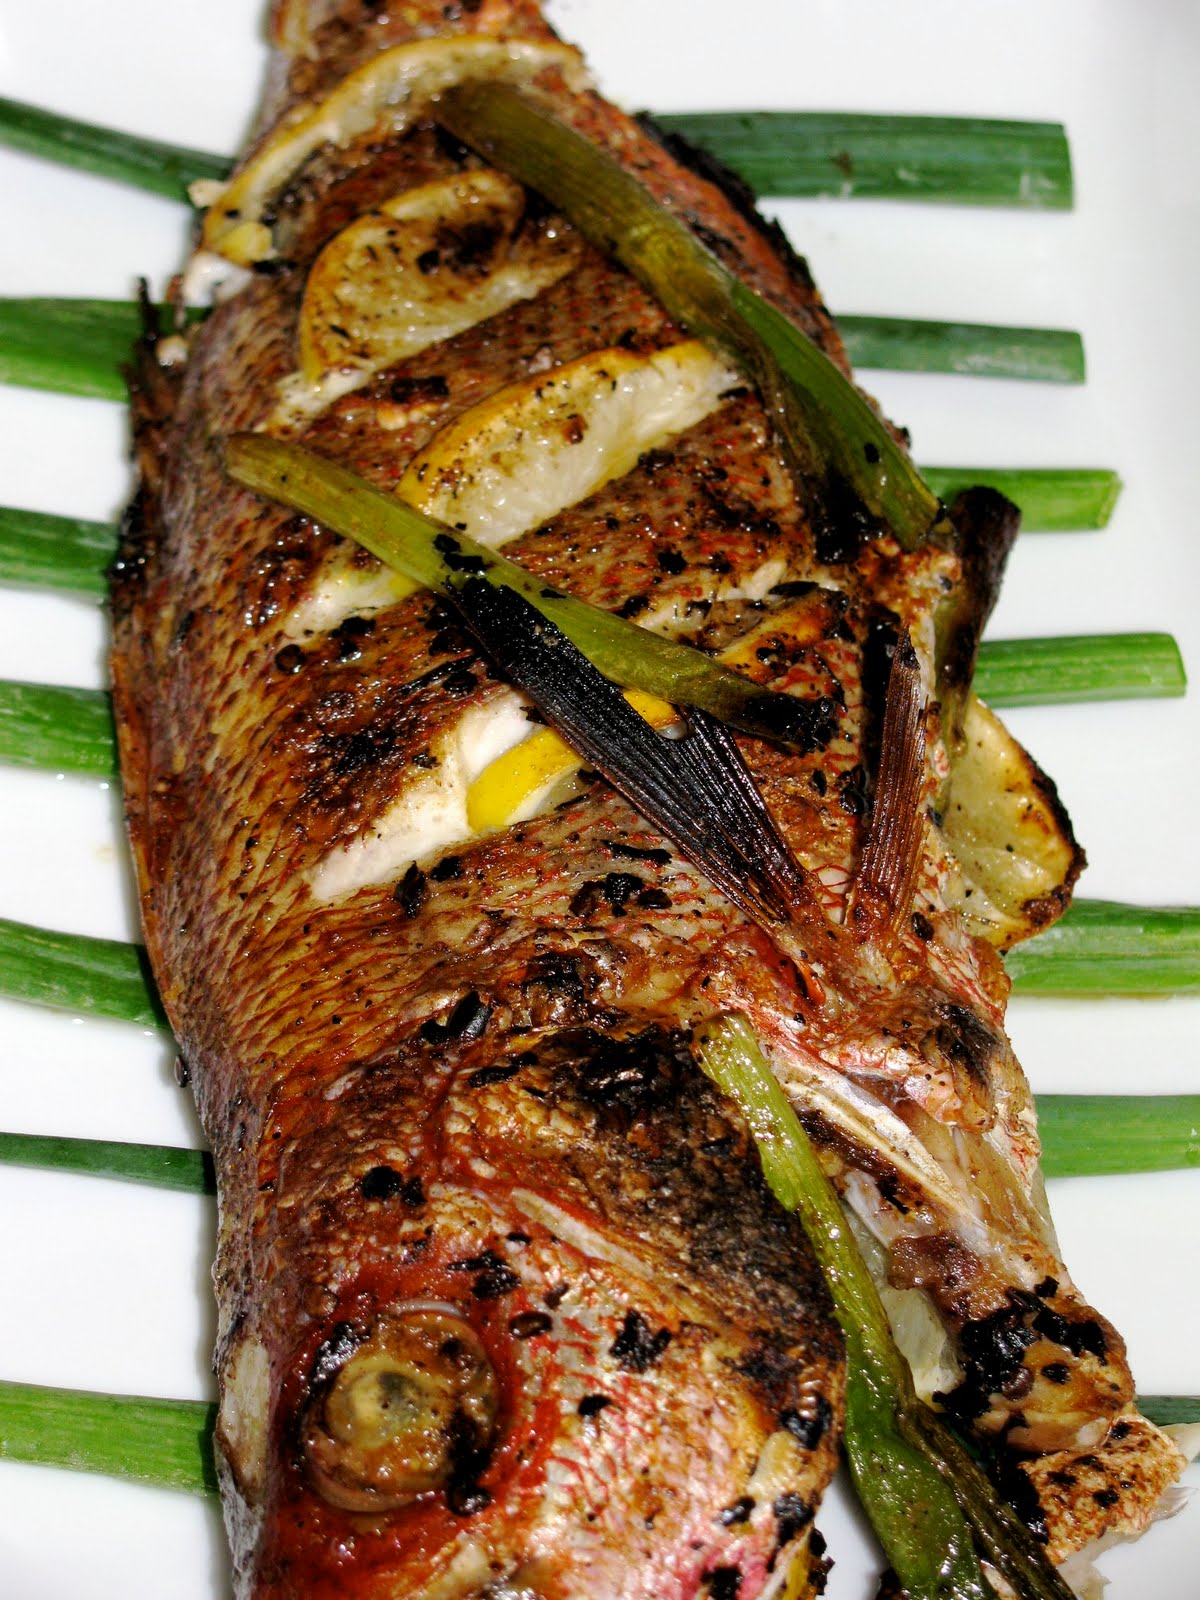 PASSION ON THE STOVE TOP: Bahamian Style Whole Broiled Red Snapper